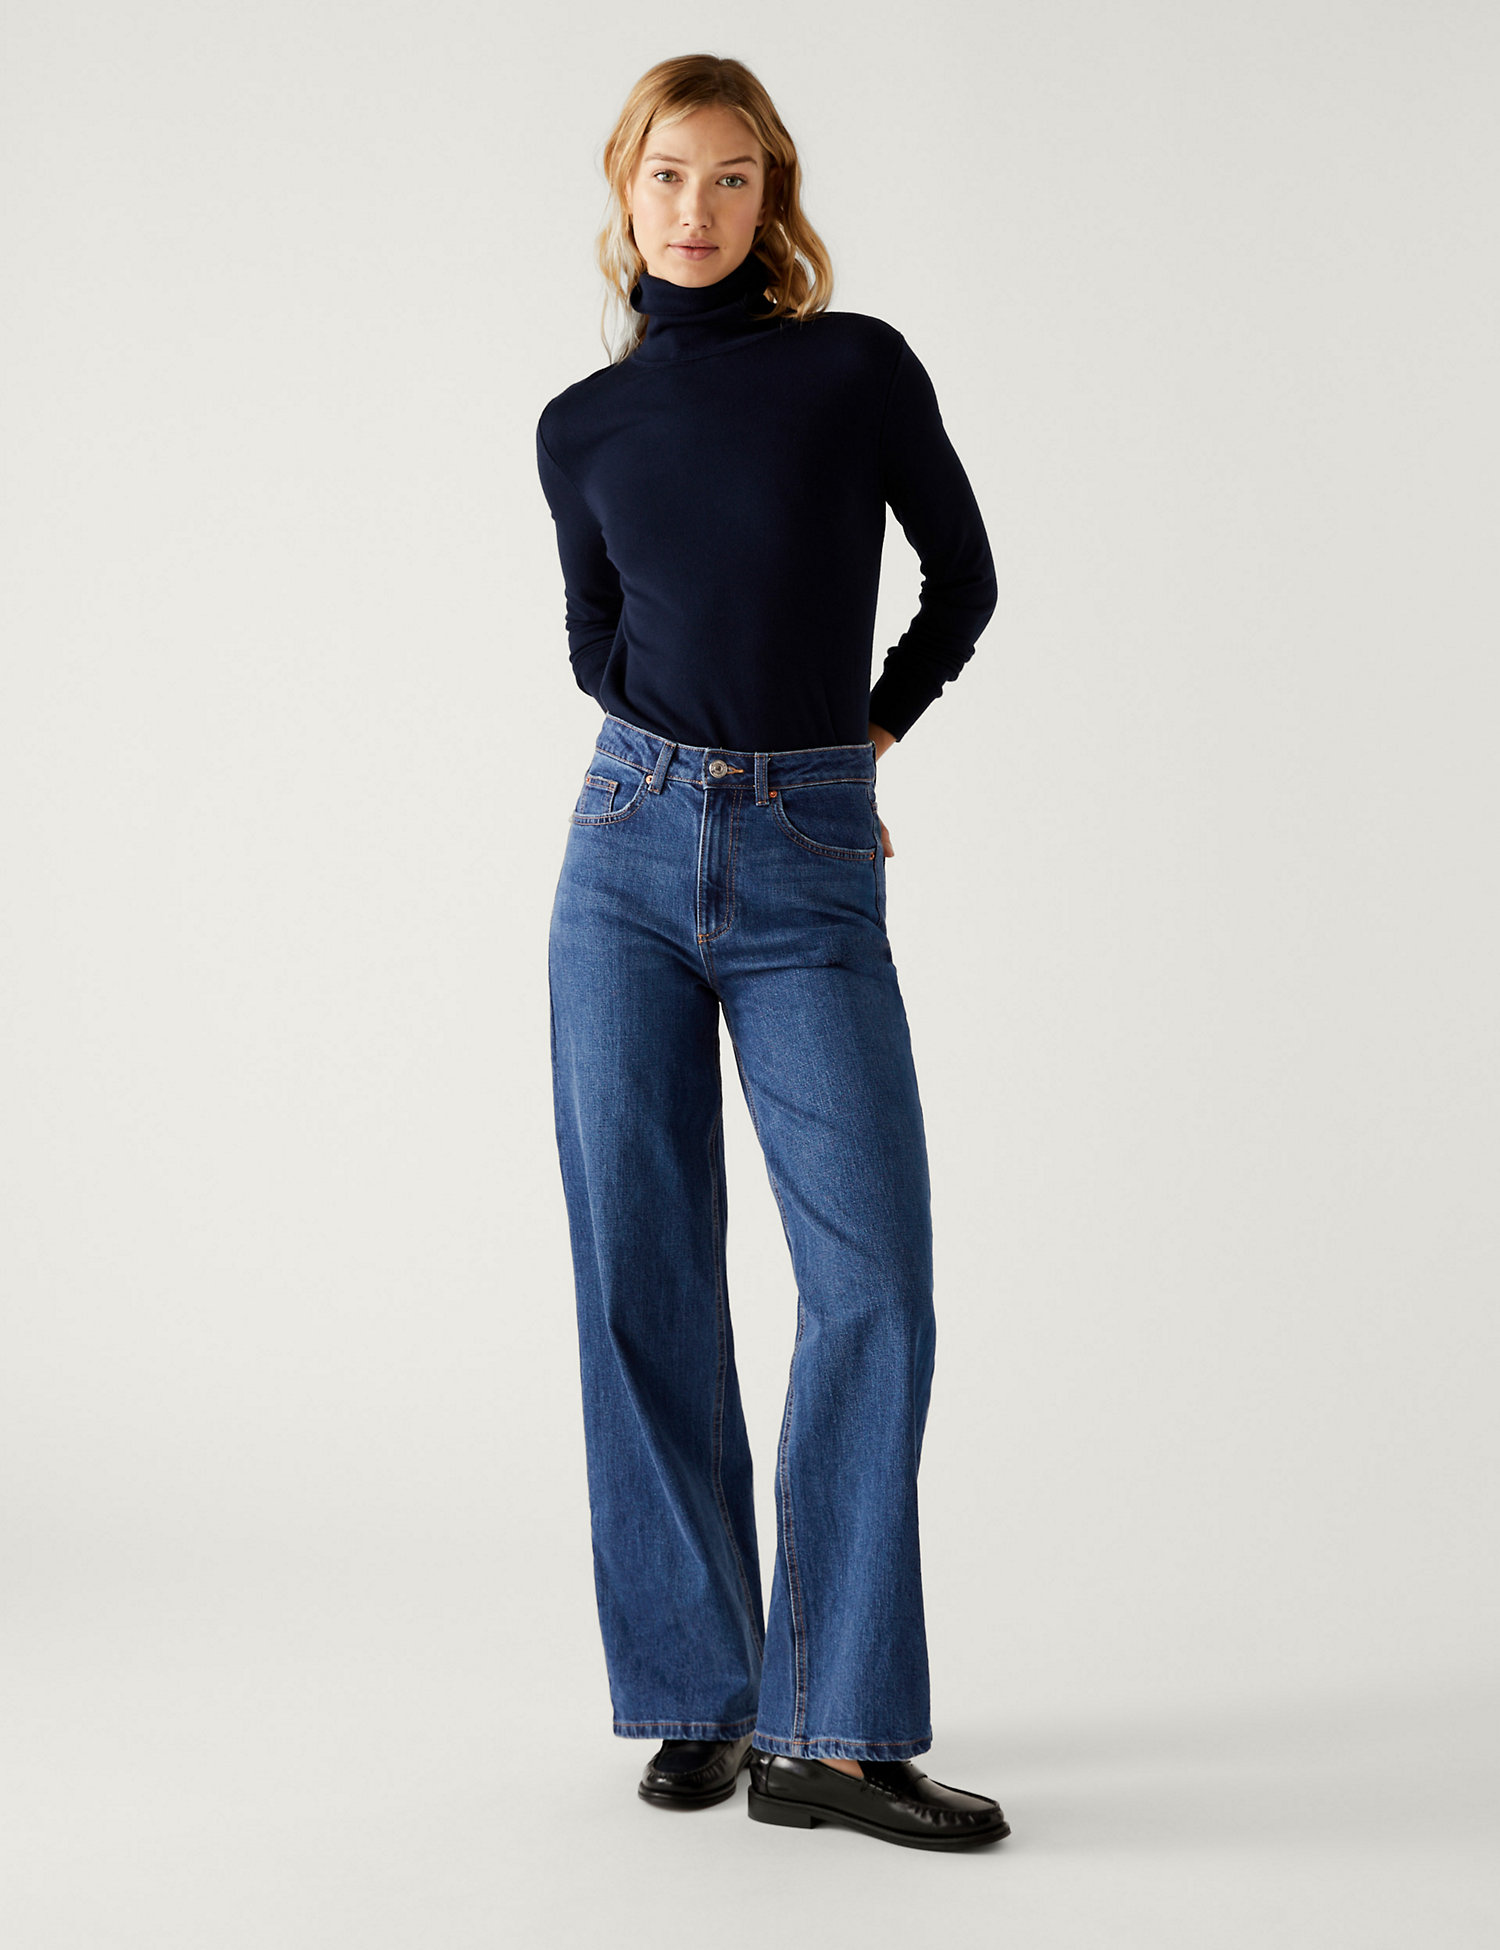 6 French-Girl Jeans-and-Flat-Shoe Outfits to Try This Autumn | Who What ...